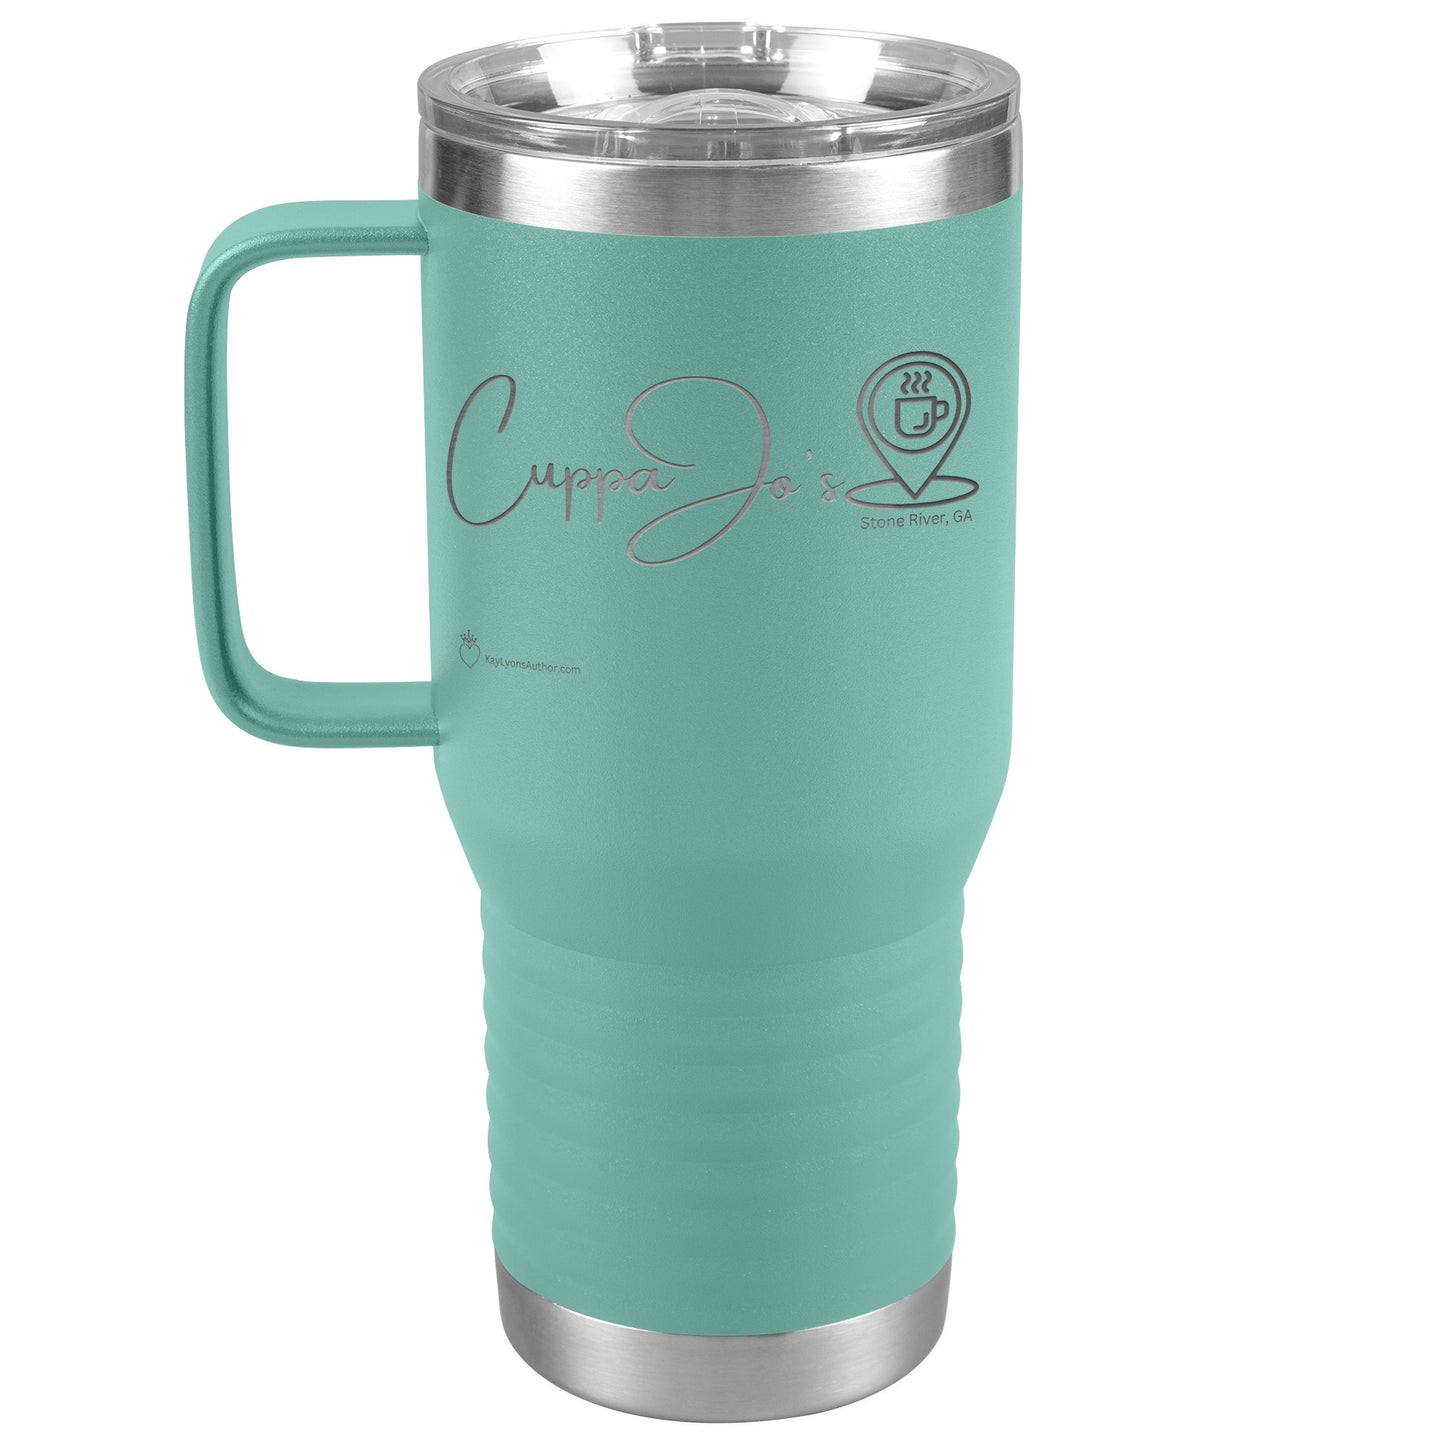 Cuppa Jo's Tumbler as featured in the Stone River Series